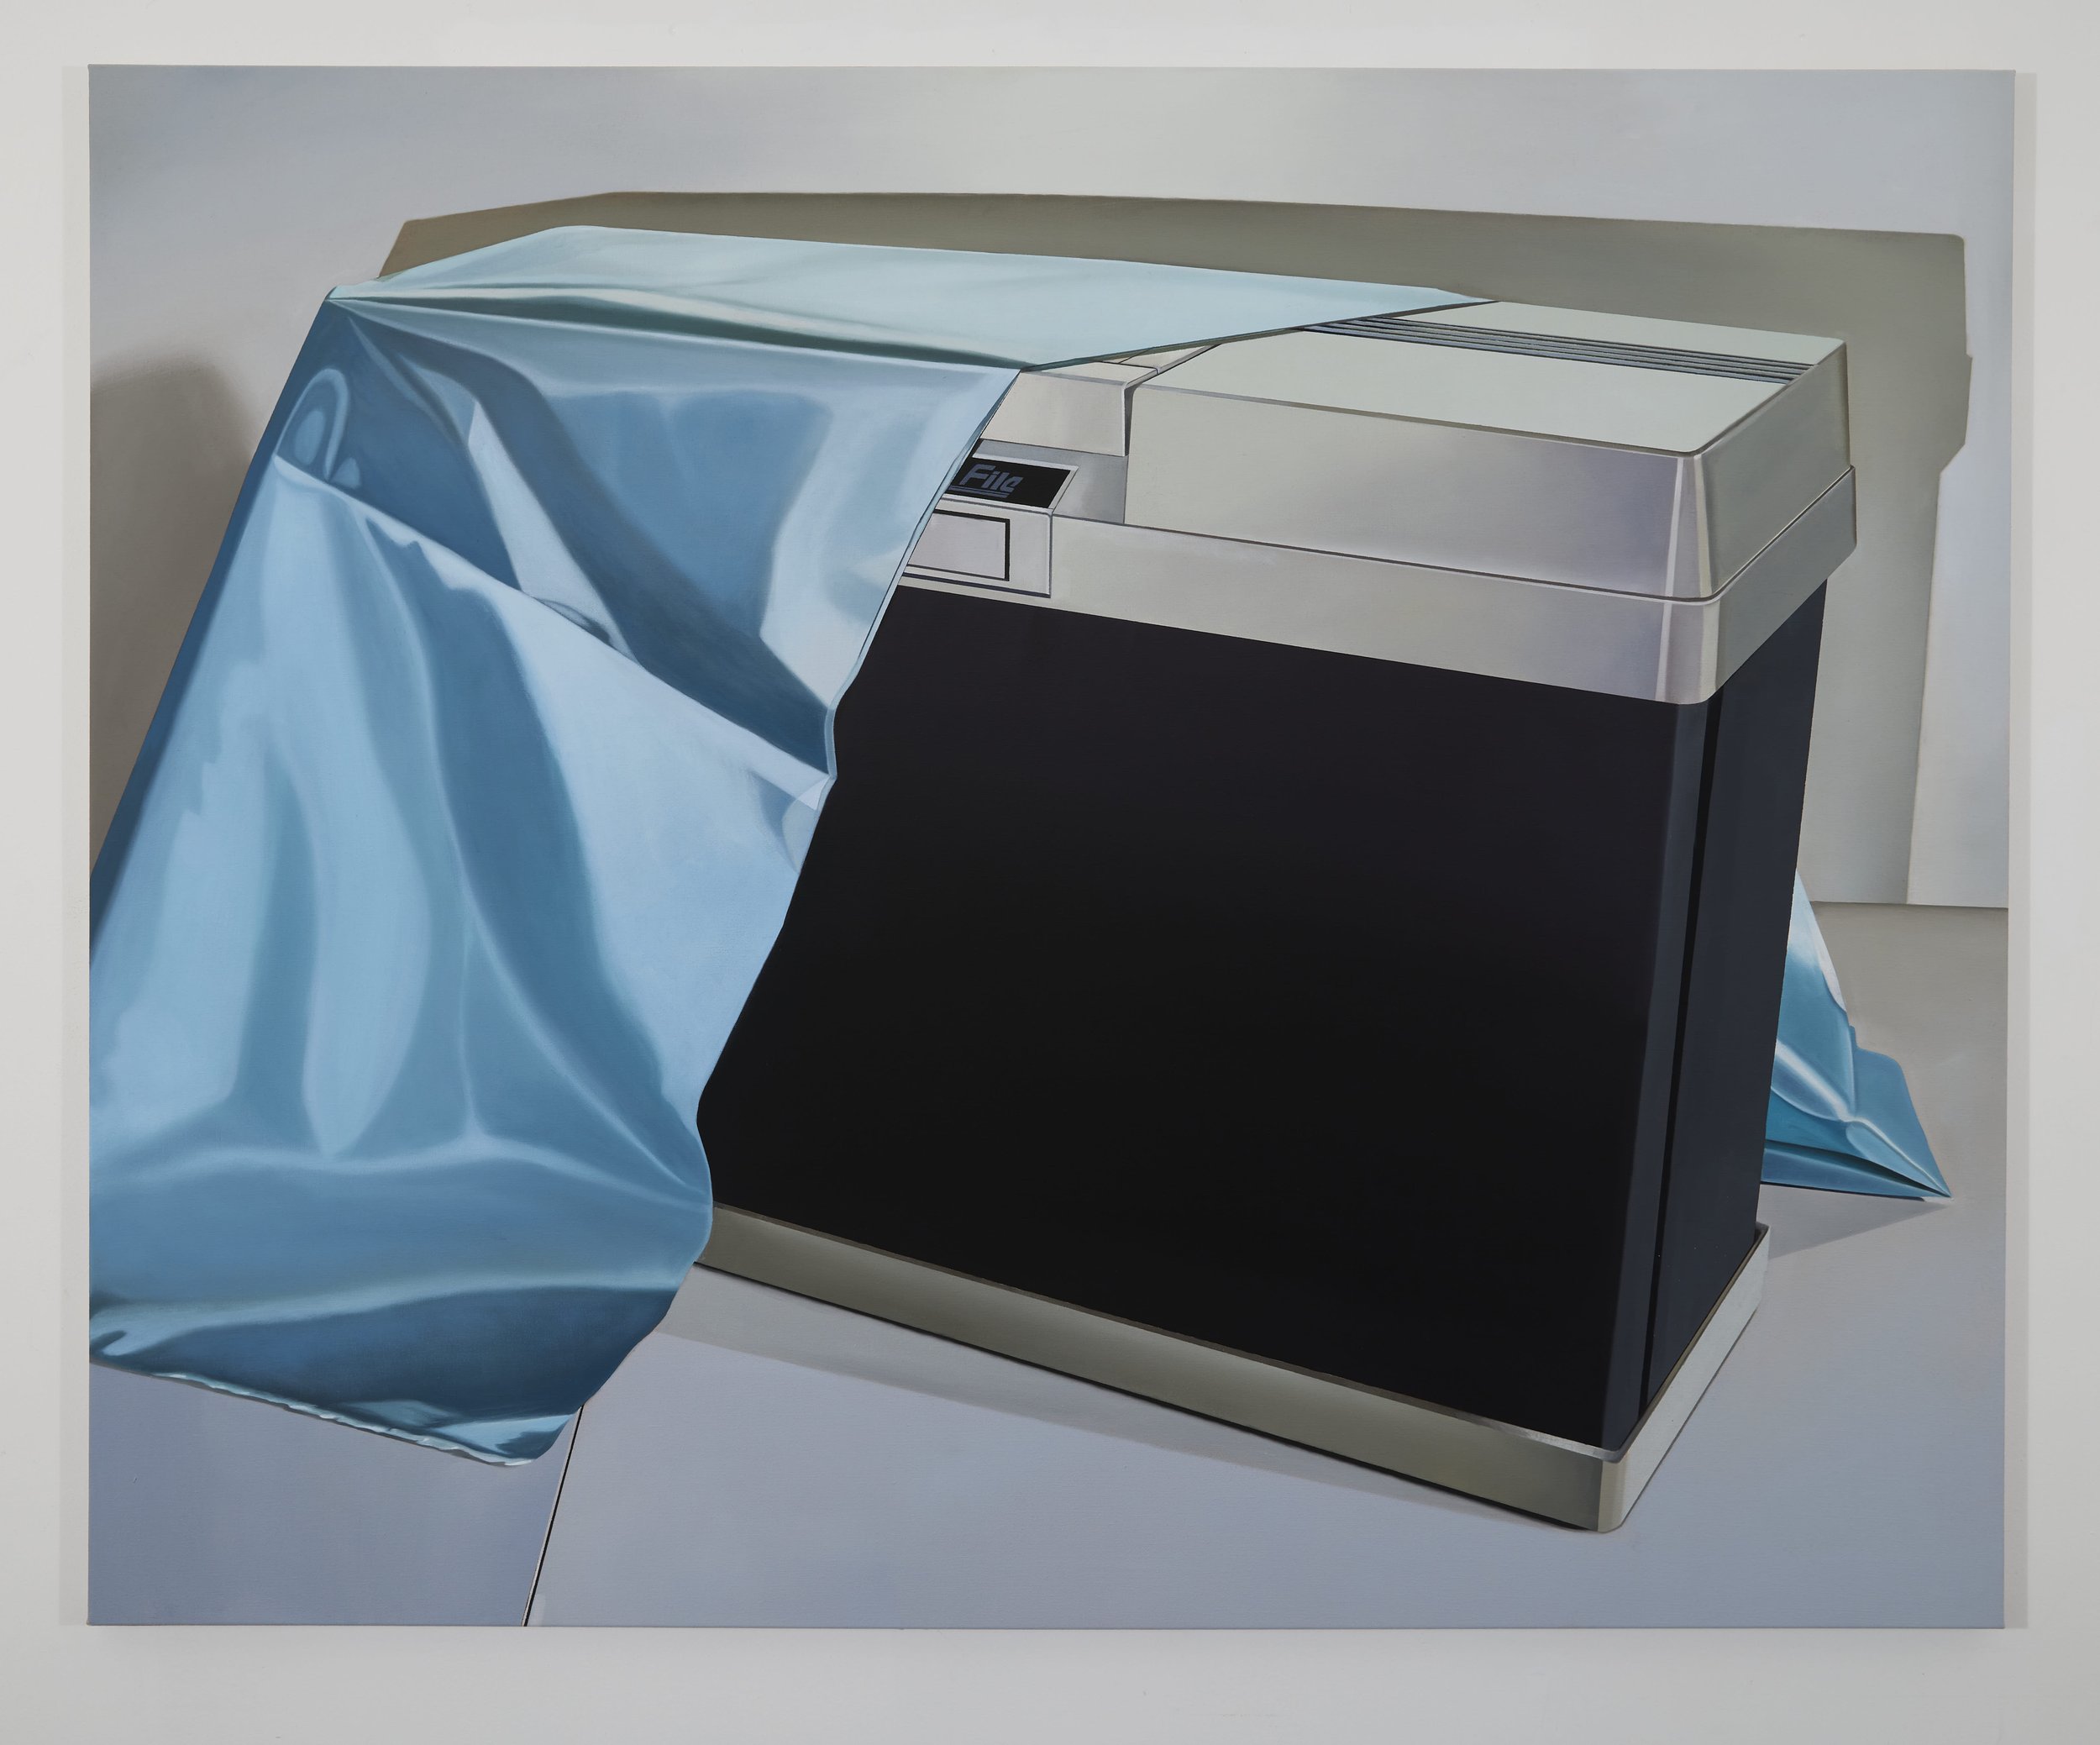  Storage devices obscured  Oil on linen  130 X 160cm  2023  Public Collection 